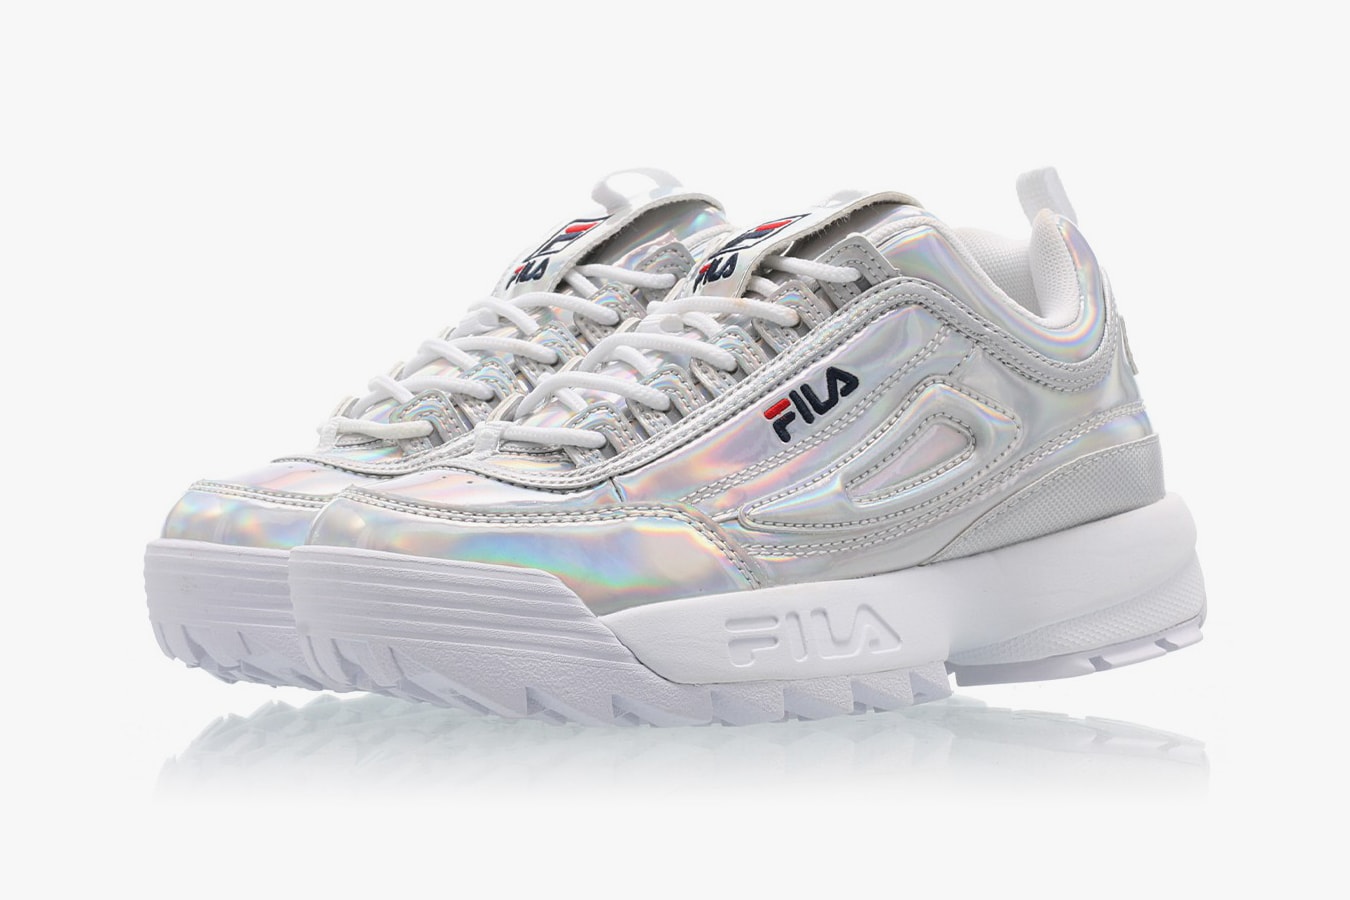 FILA Disruptor 2 Chunky Sneaker Trainer Holographic Silver Shiny